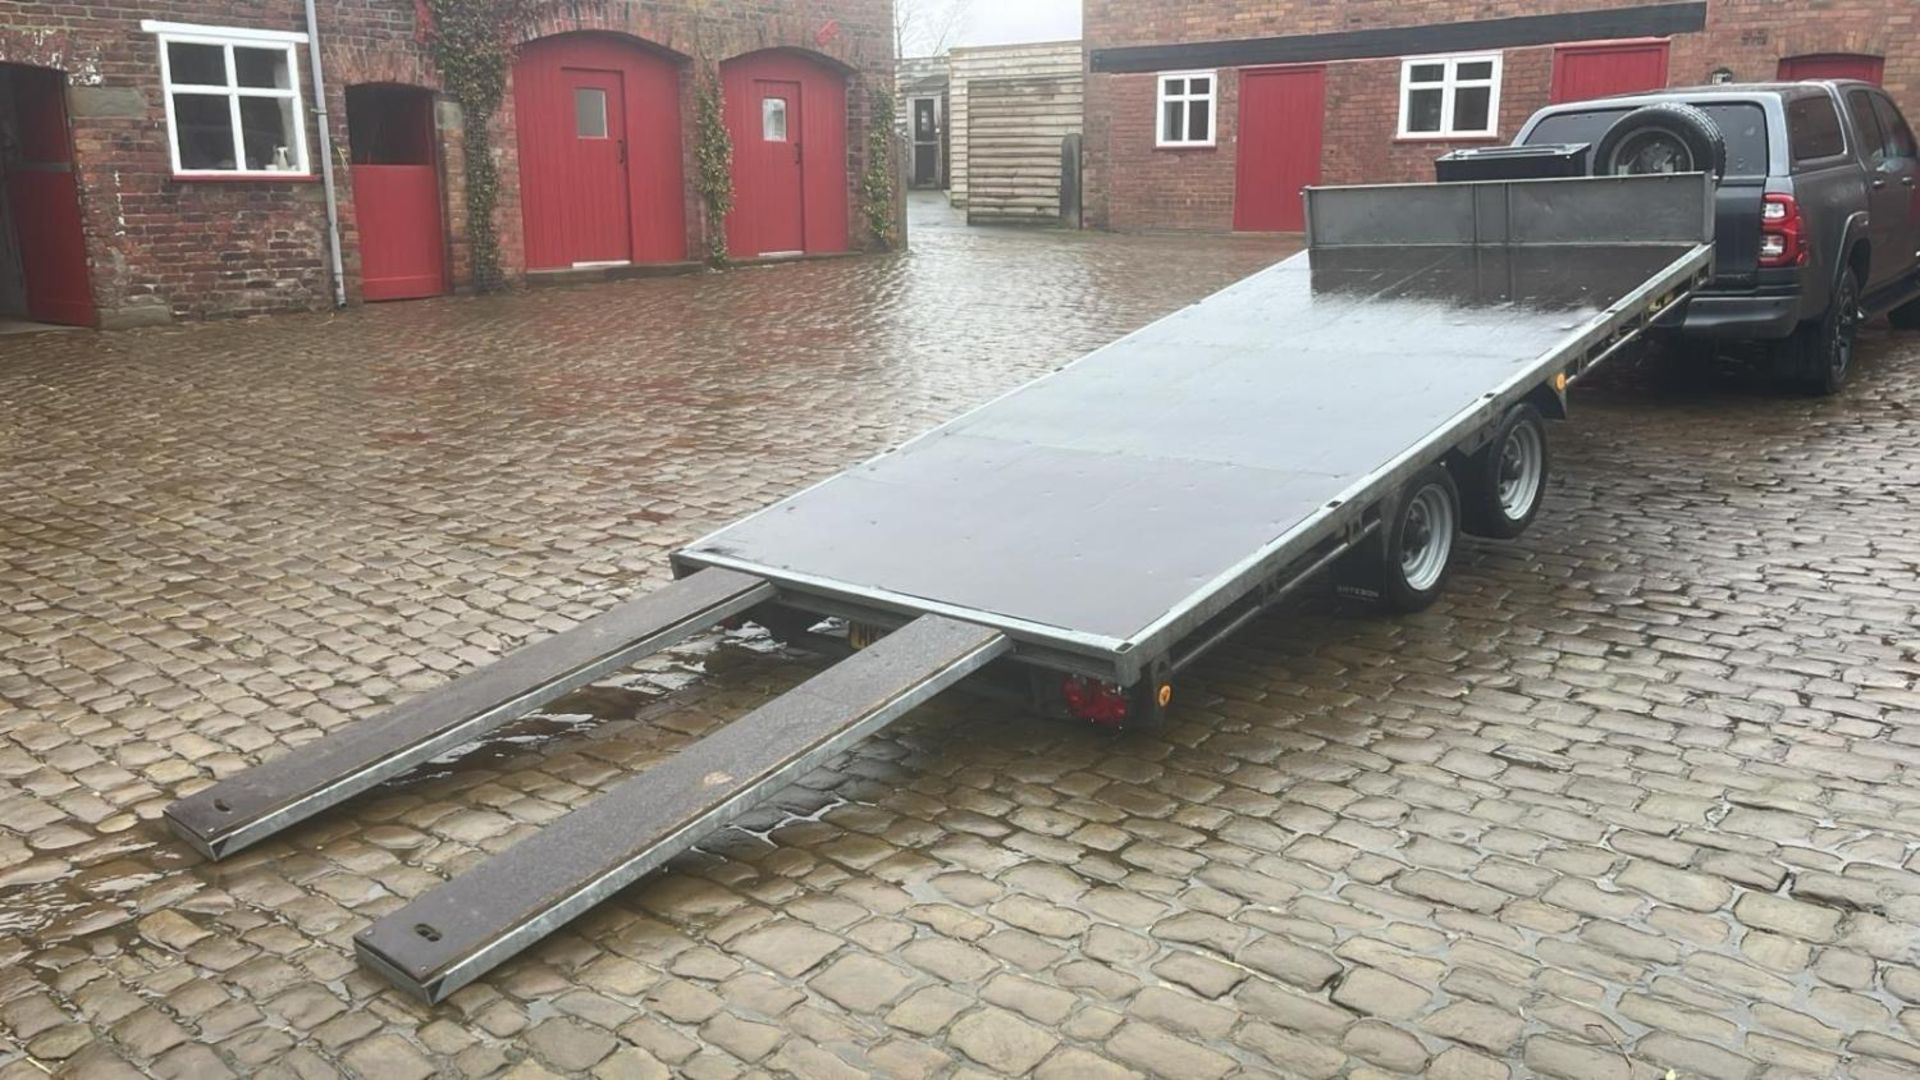 2021 BATESON 14' TWIN AXLE TILT BED TRAILER WITH RAMPS + VAT - Image 5 of 15